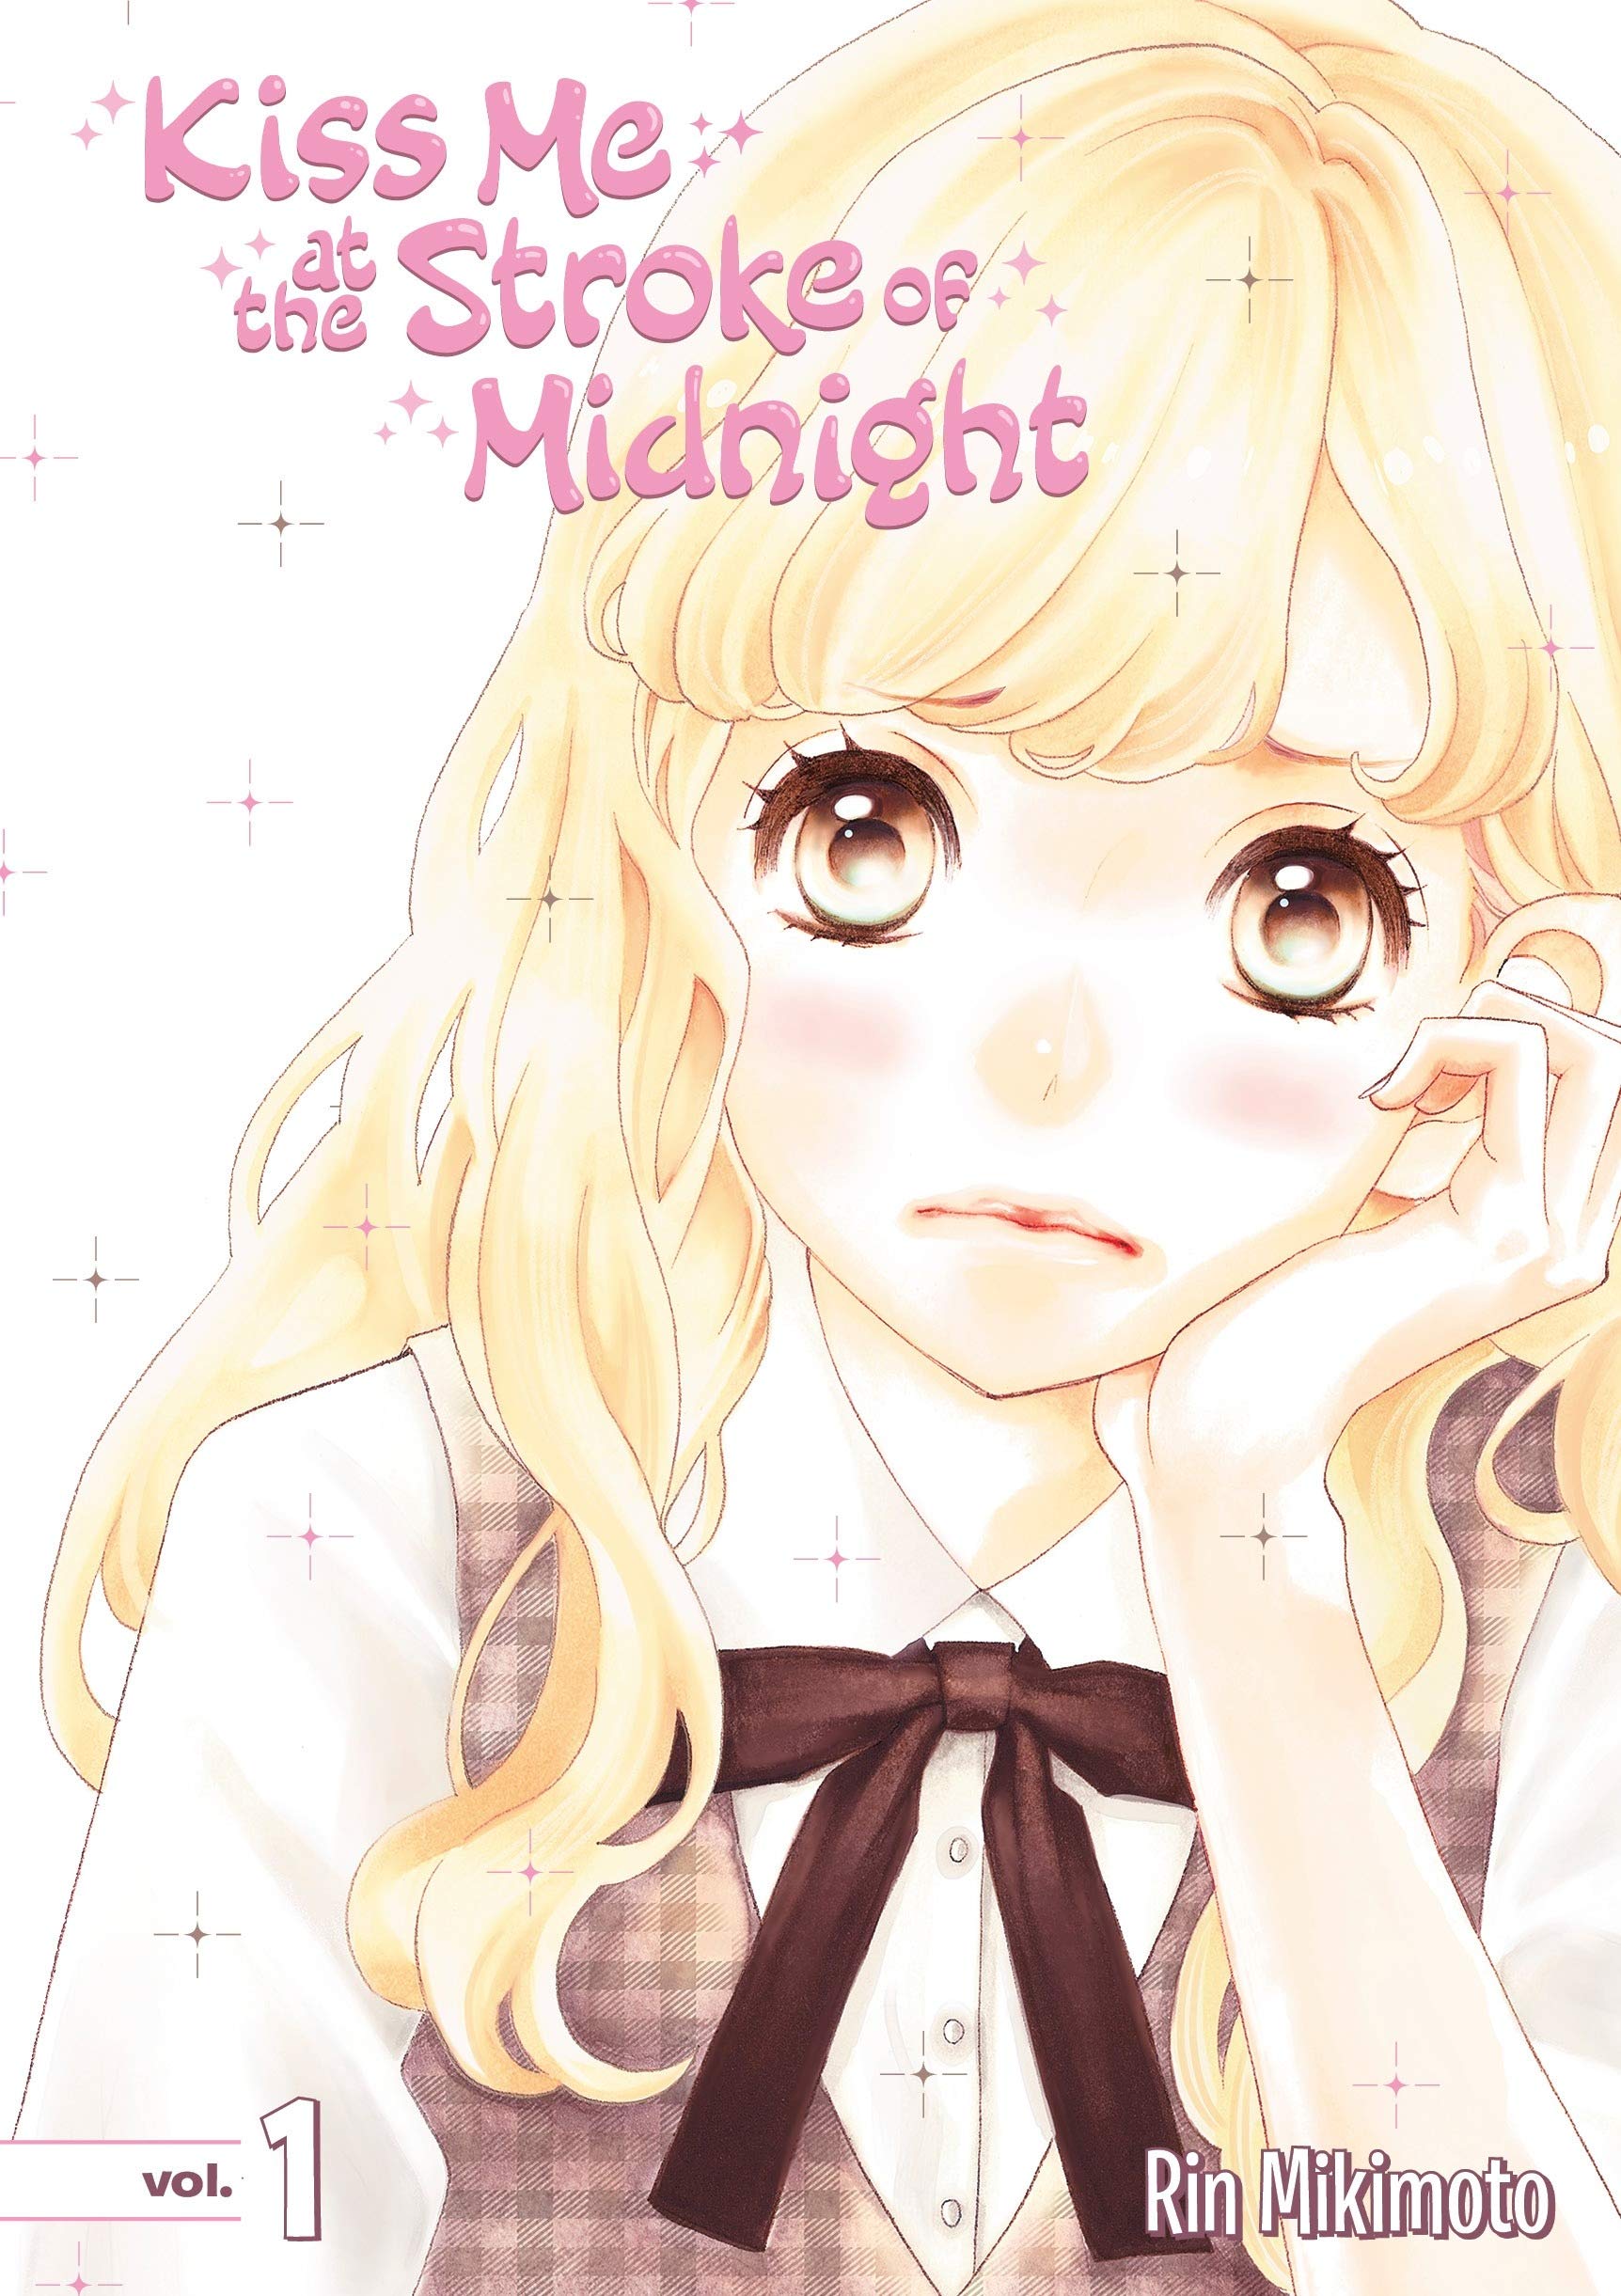 Kiss Me at the Stroke of Midnight. Volume 1 | Rin Mikimoto